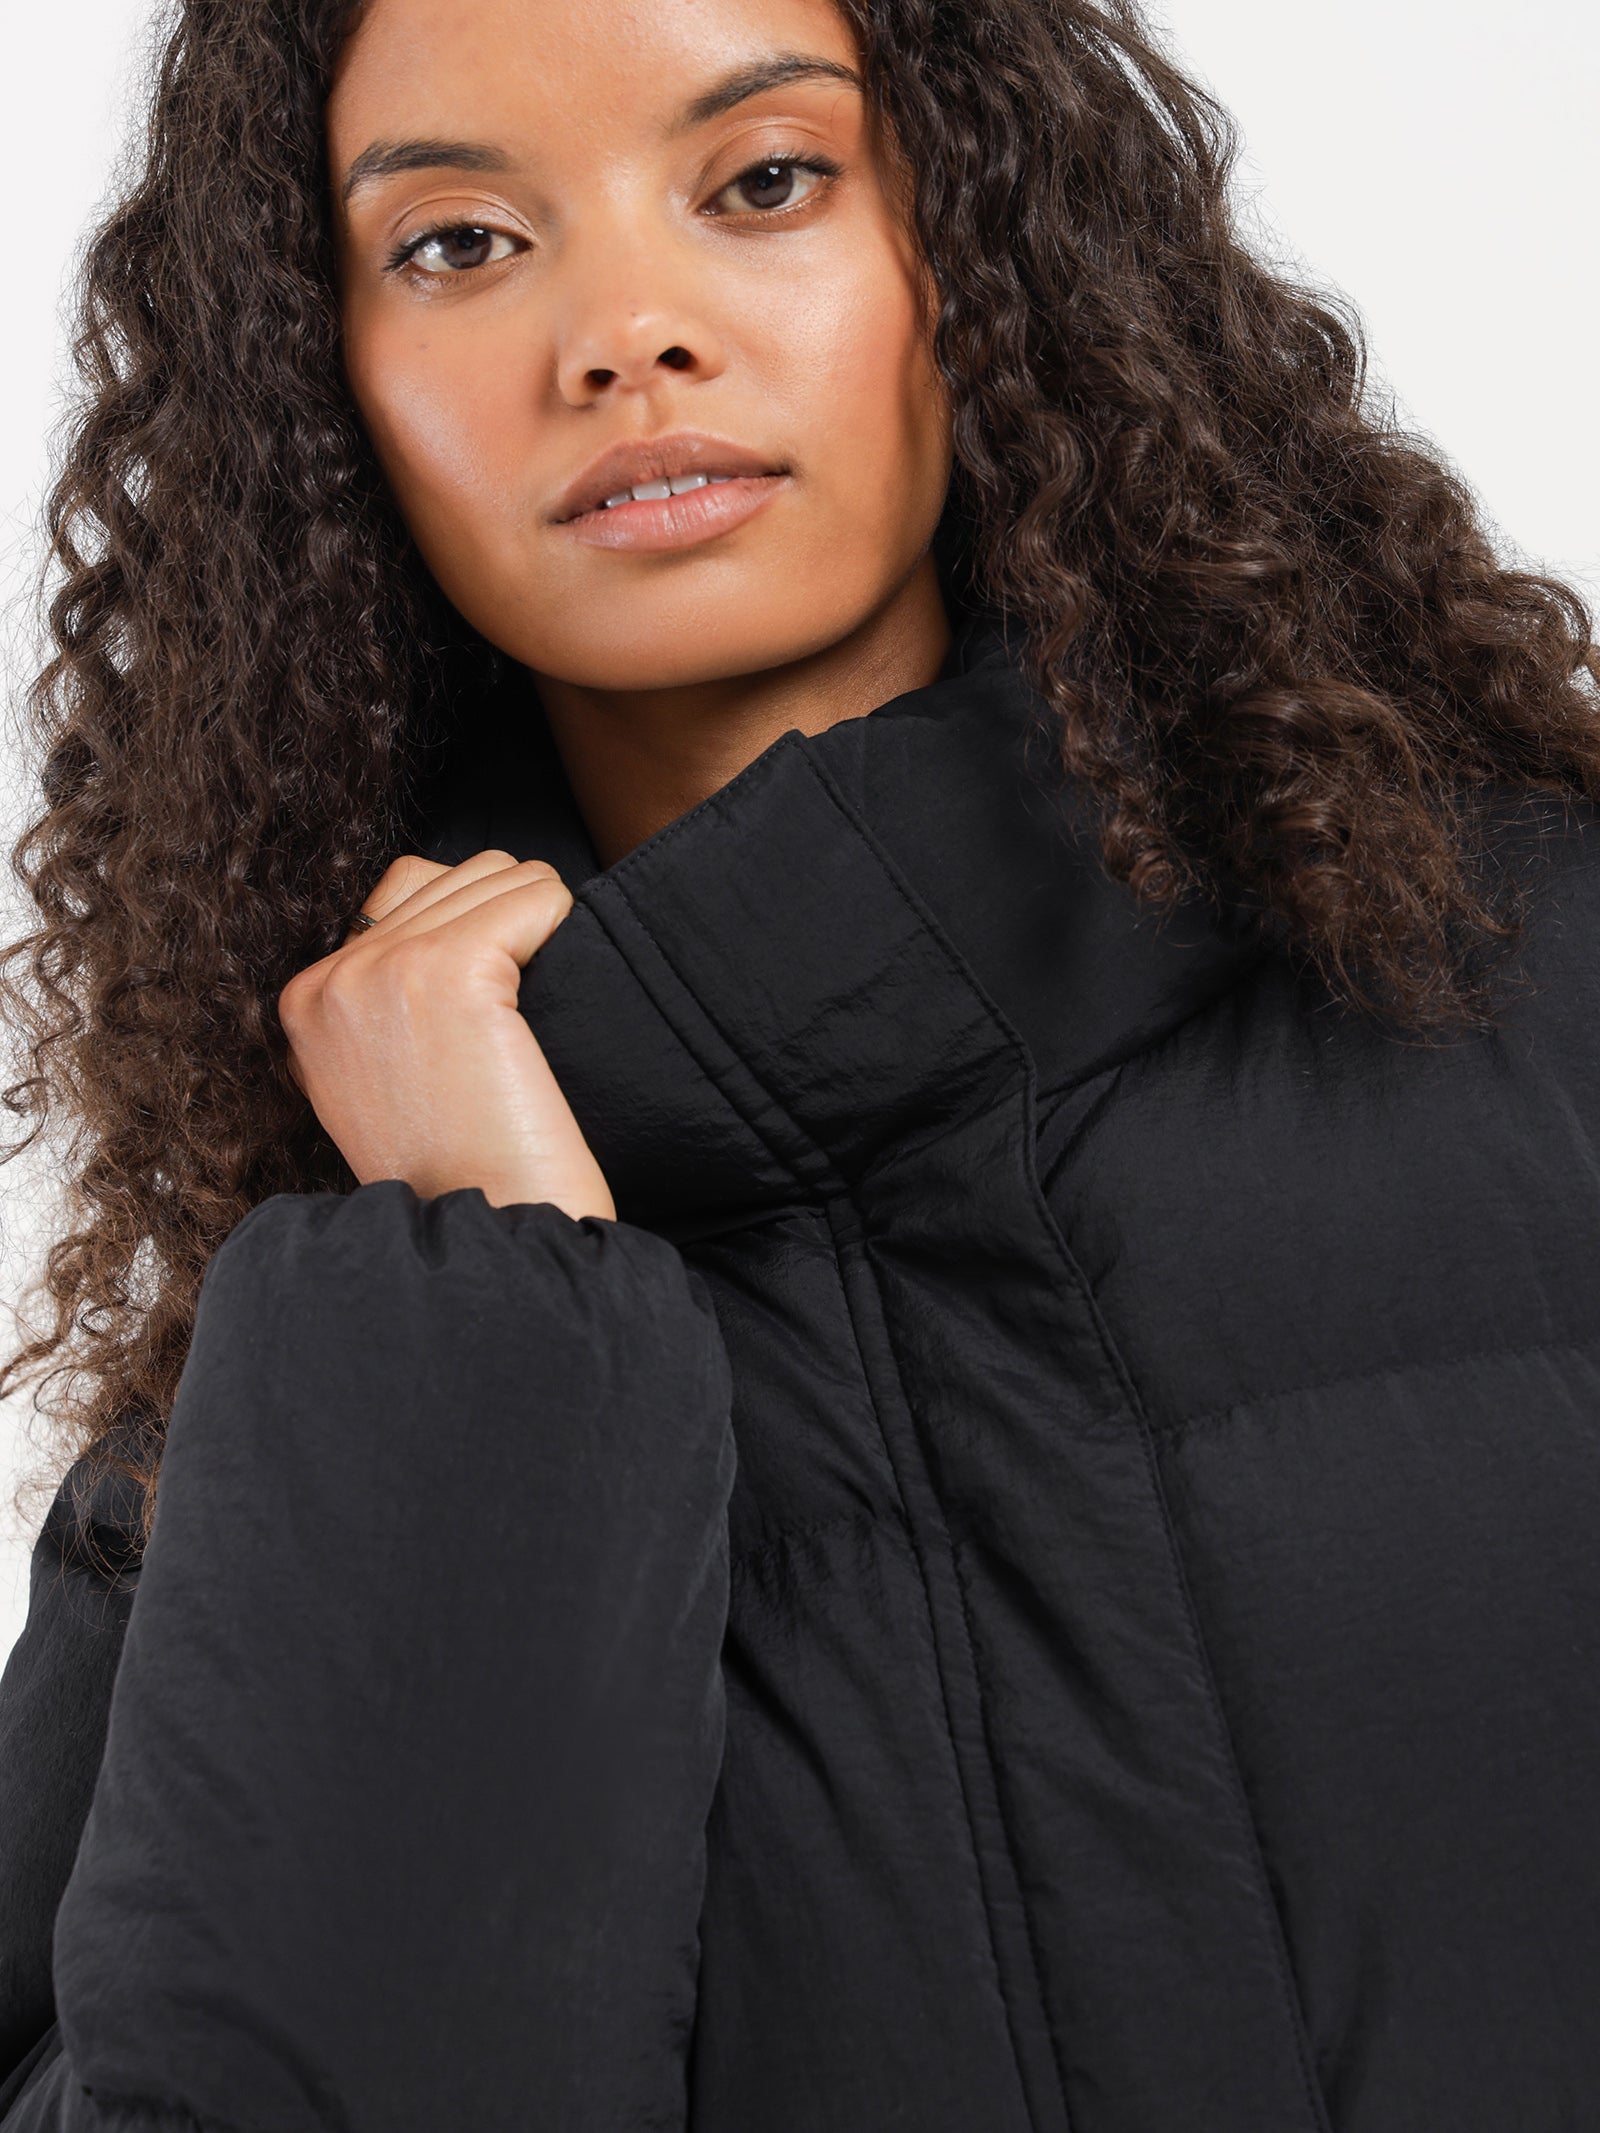 Topher Puffer Jacket in Black - Glue Store